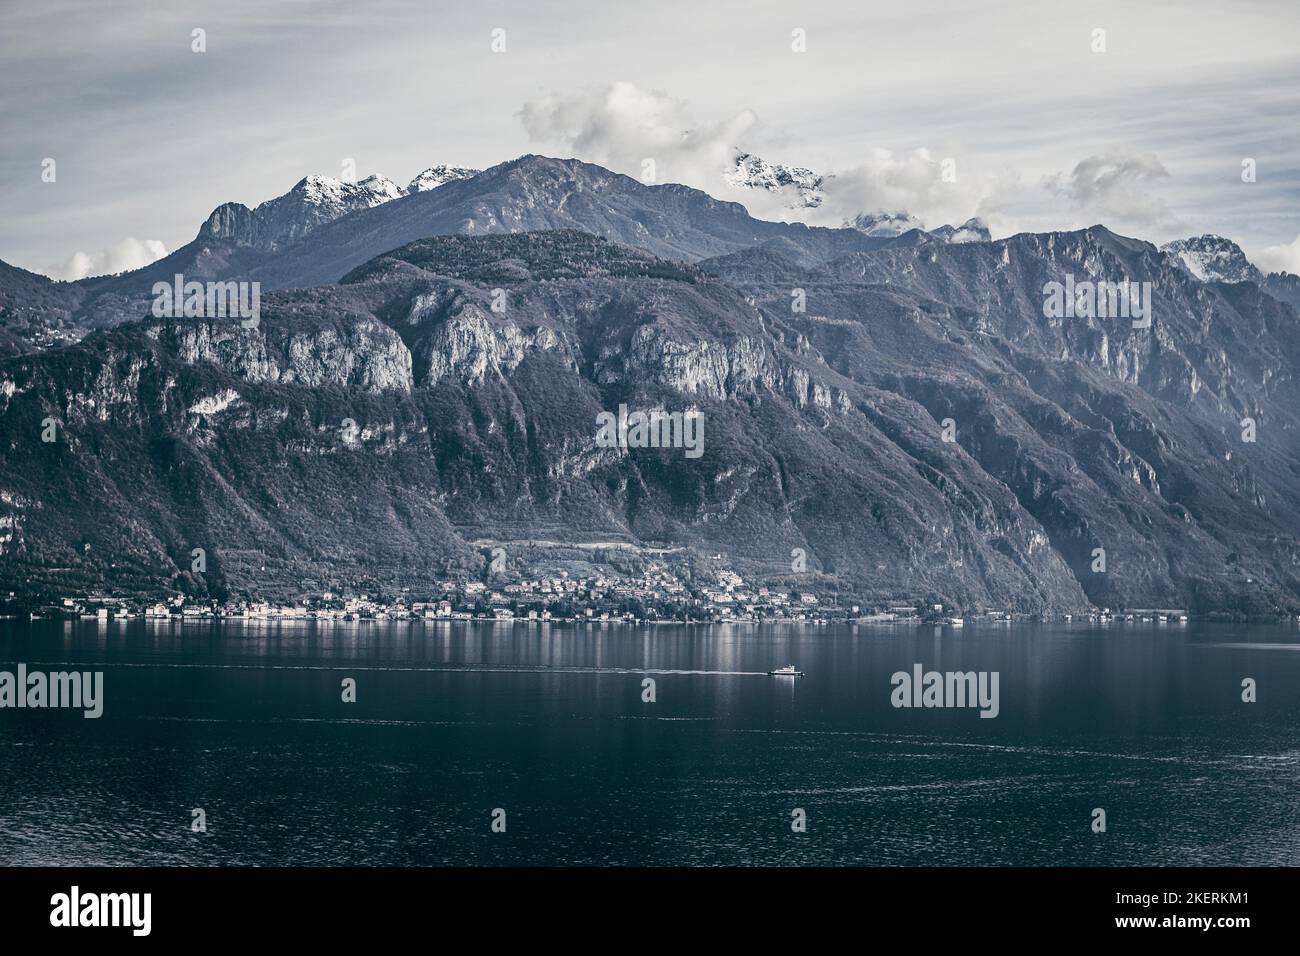 A dramatic view of Bellagio on the coast of Lake Como with the Alps in the background. Stock Photo